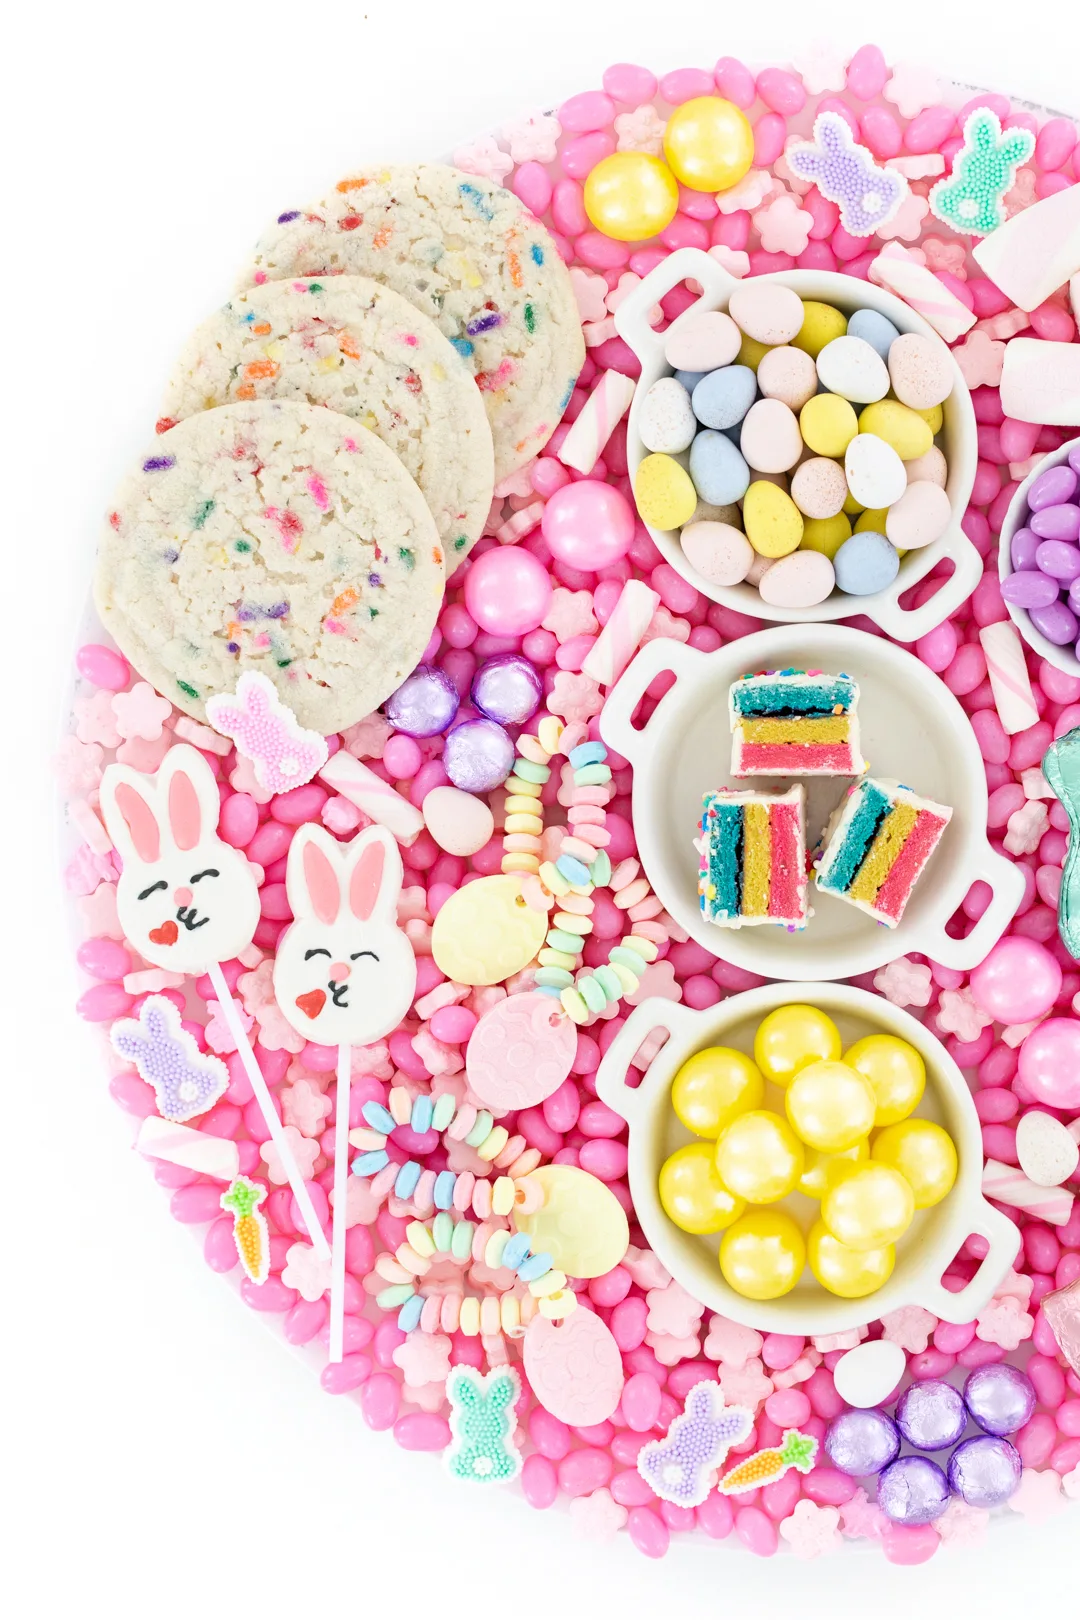 pretty easter candy tray with desserts and candies that are pastel colored